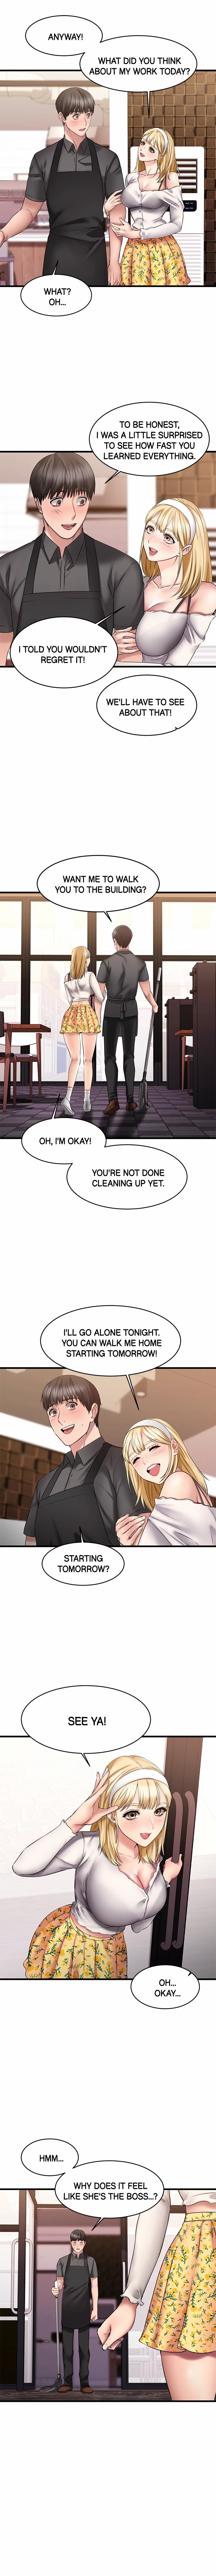 My Female Friend Who Crossed The Line - Chapter 8 Page 12